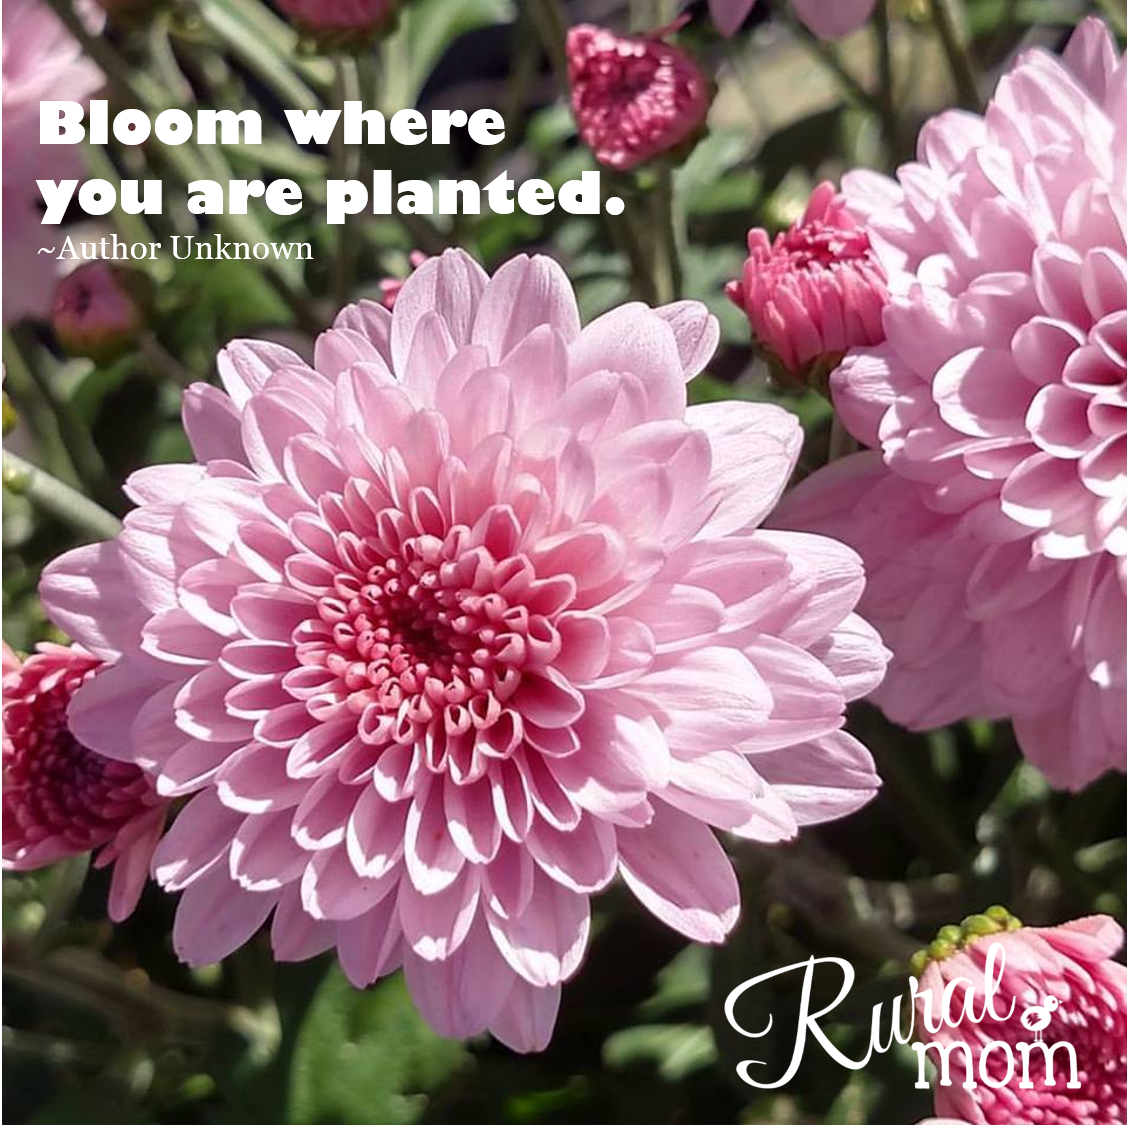 bloom where you are planted.